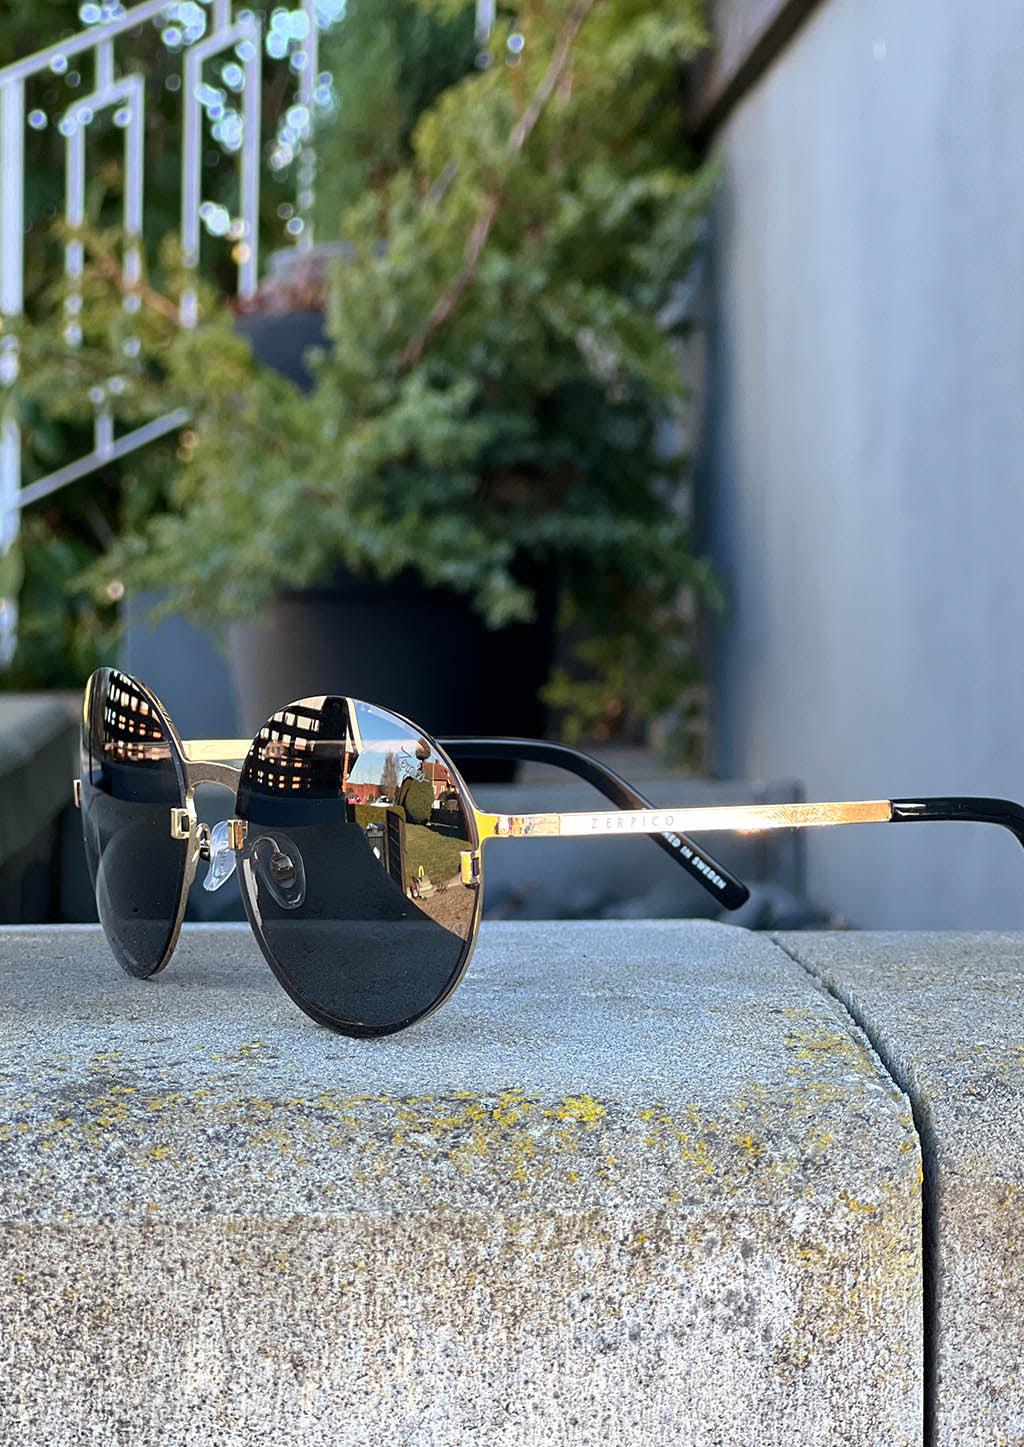 Titan - Titanium Round Sunglasses V2 - 24K Gold Plated with real gold. Photo taken outside in Sweden.